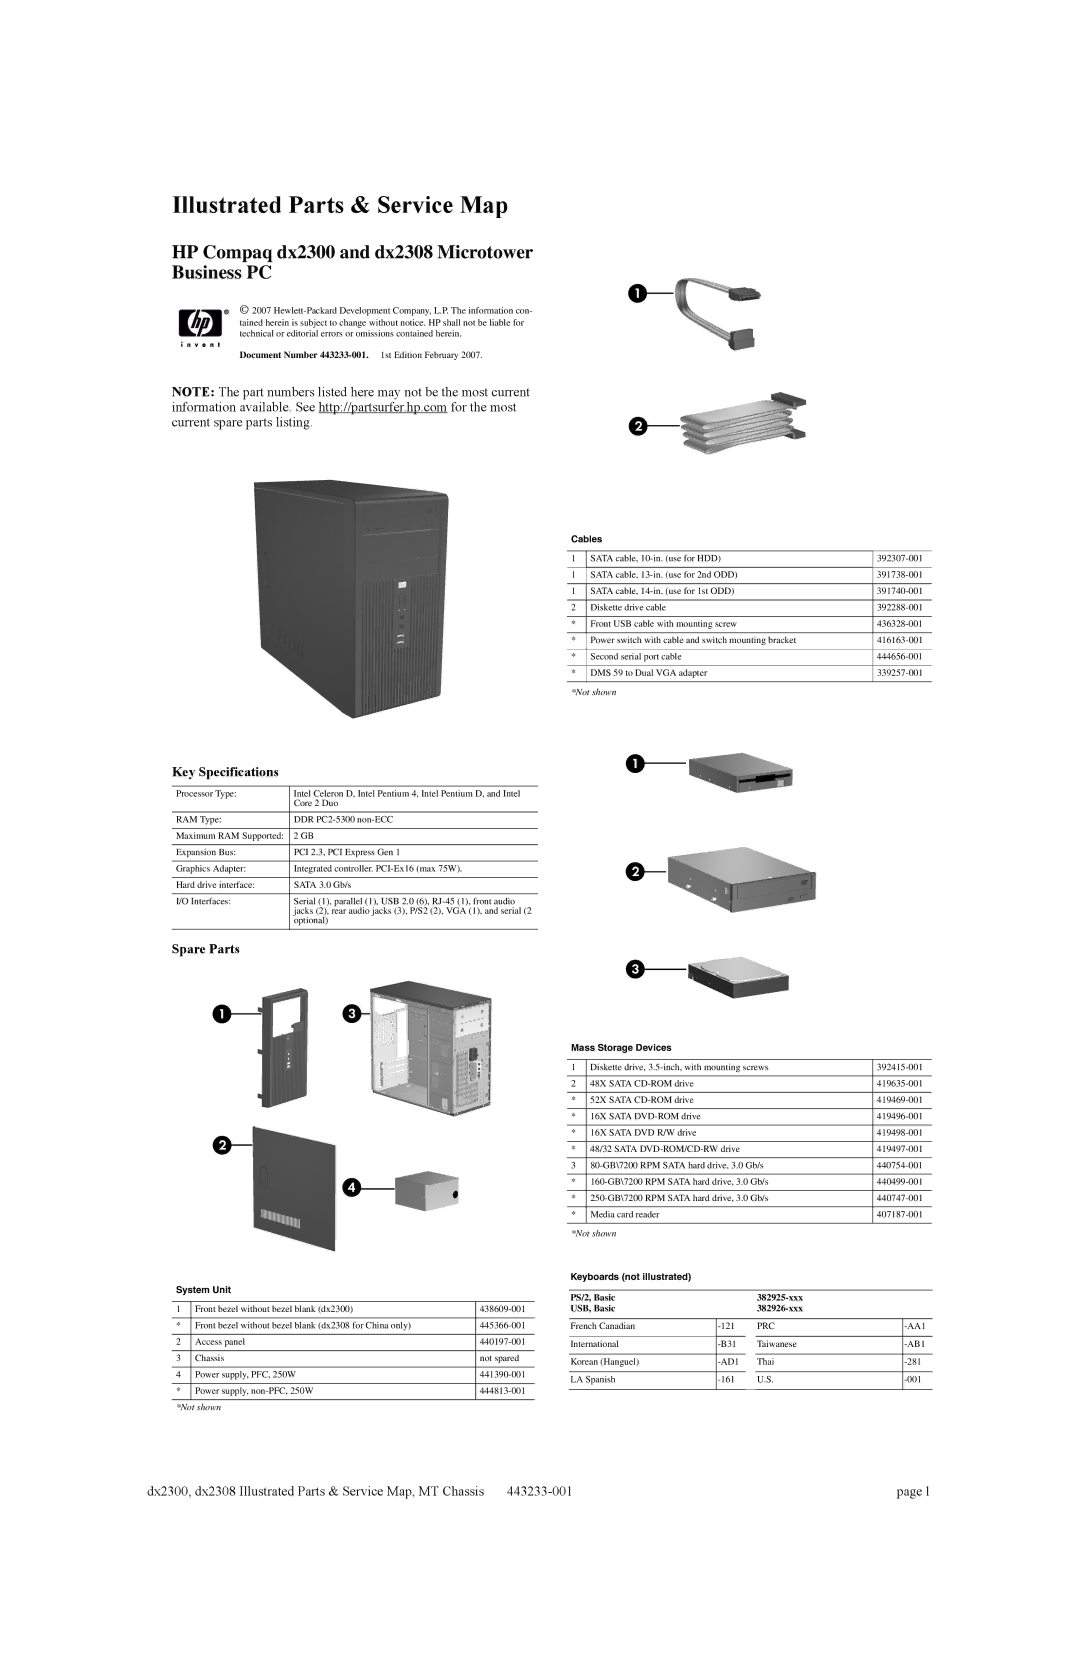 HP DX2300 manual Key Specifications, Spare Parts 